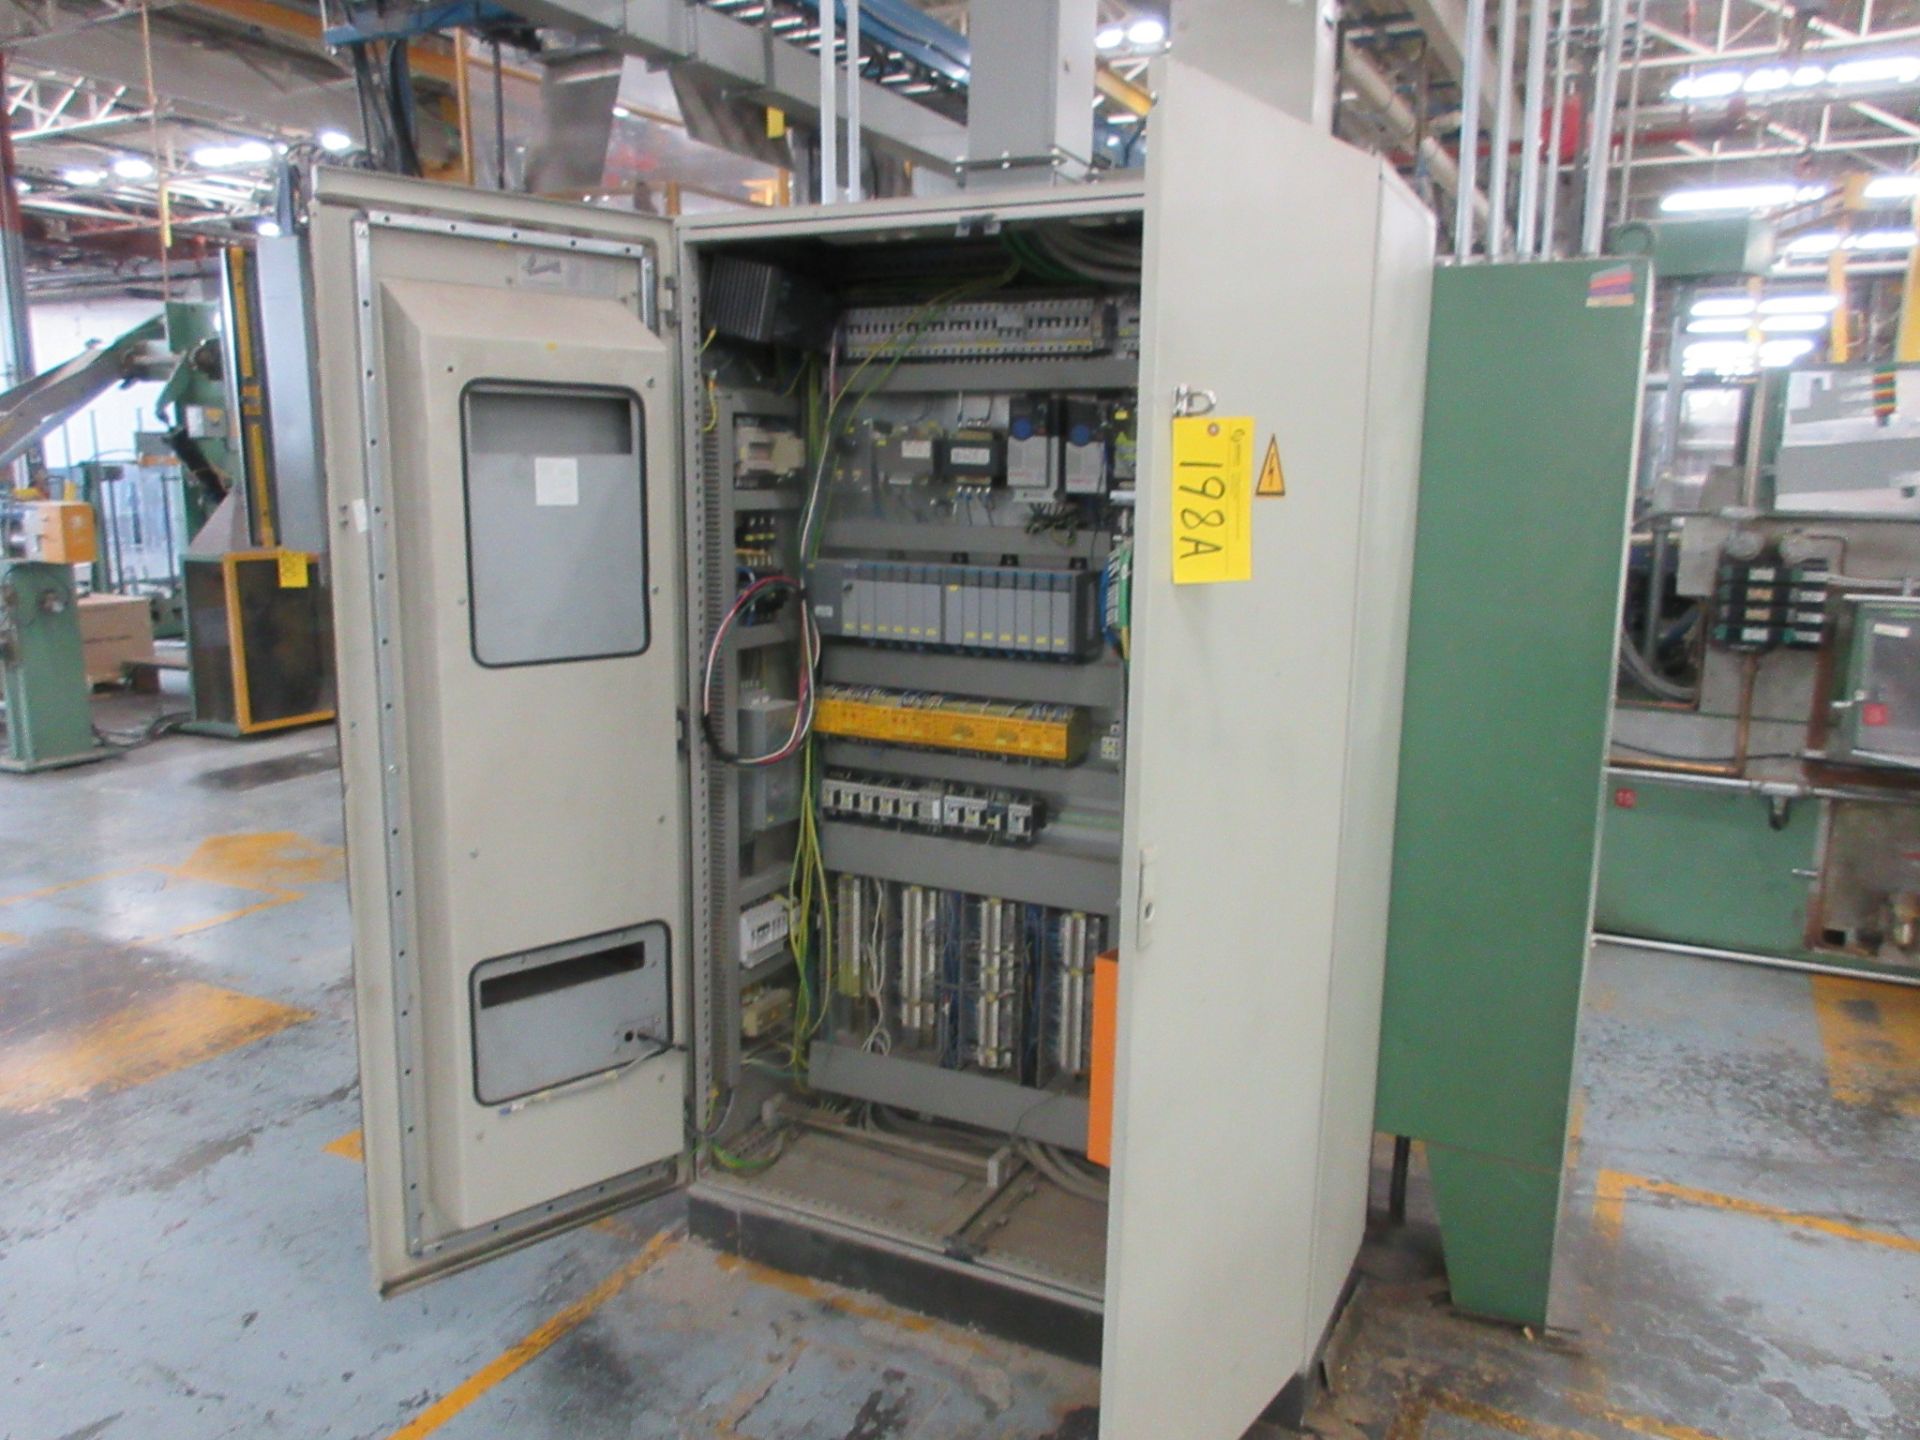 2002 SENNING WRAPPER ELECTRICAL CABINET (LAVAL 64) - Image 4 of 9